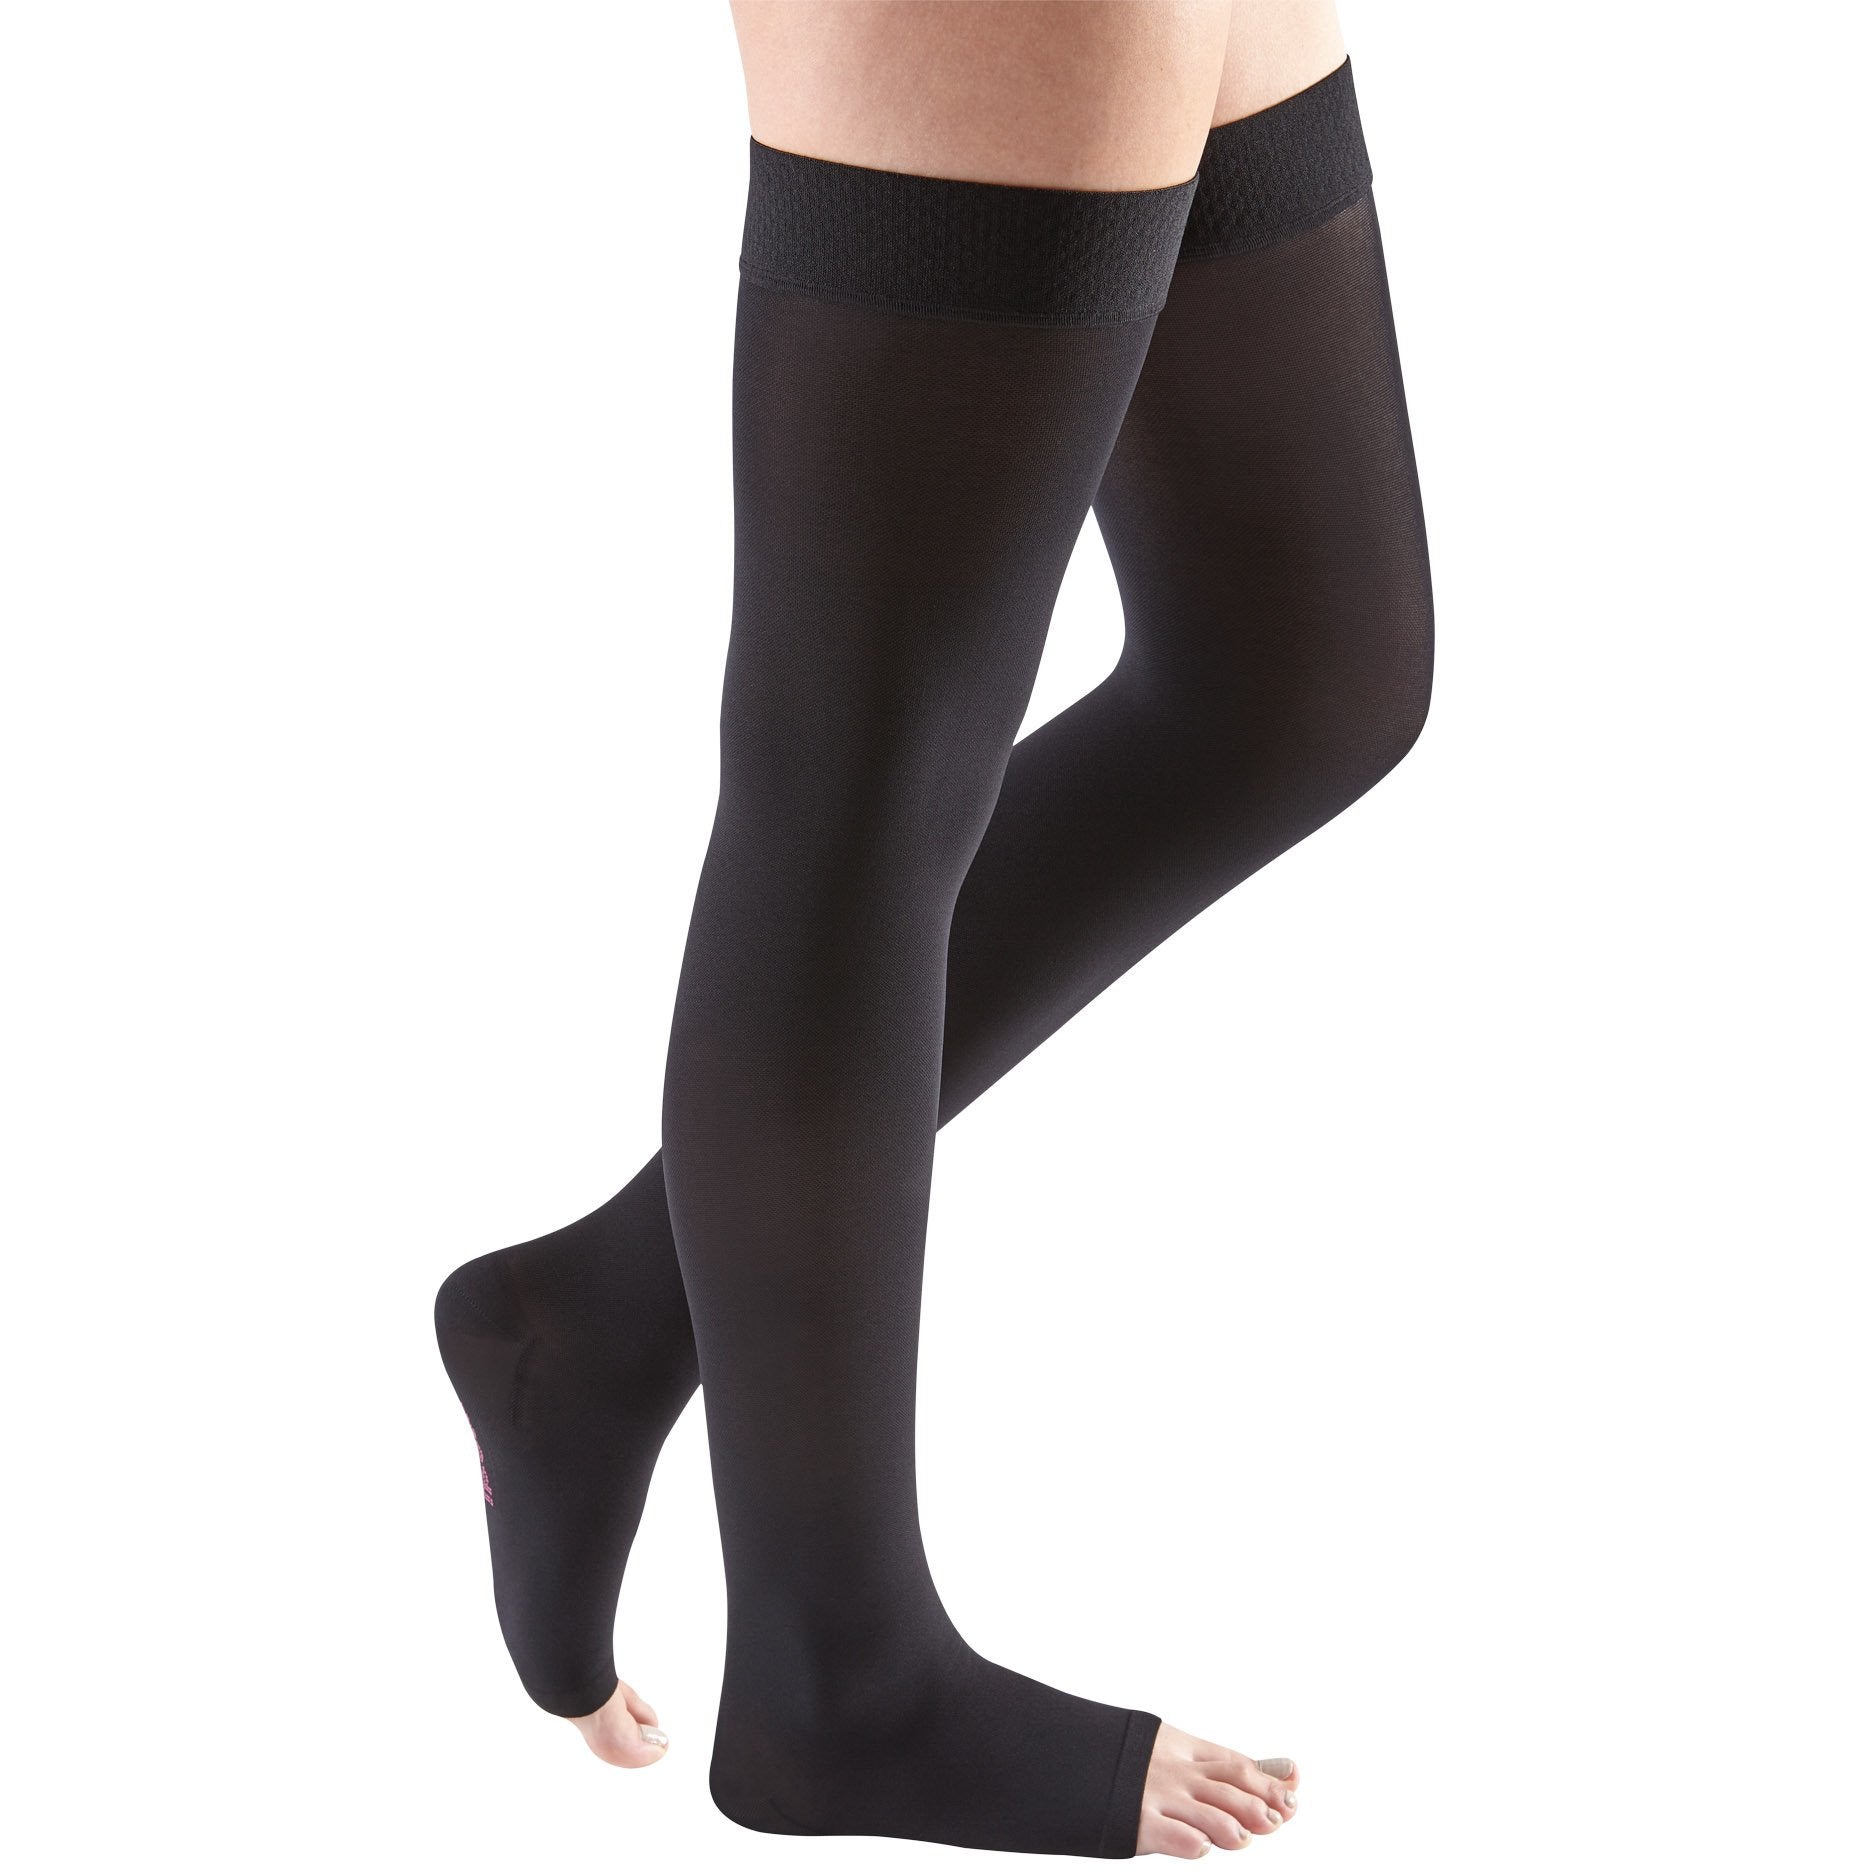 Mediven Plus Thigh High Plain Top (Use with Suspendor Belt) Medical  Compression Stockings 34-36 mmHg Open Toe